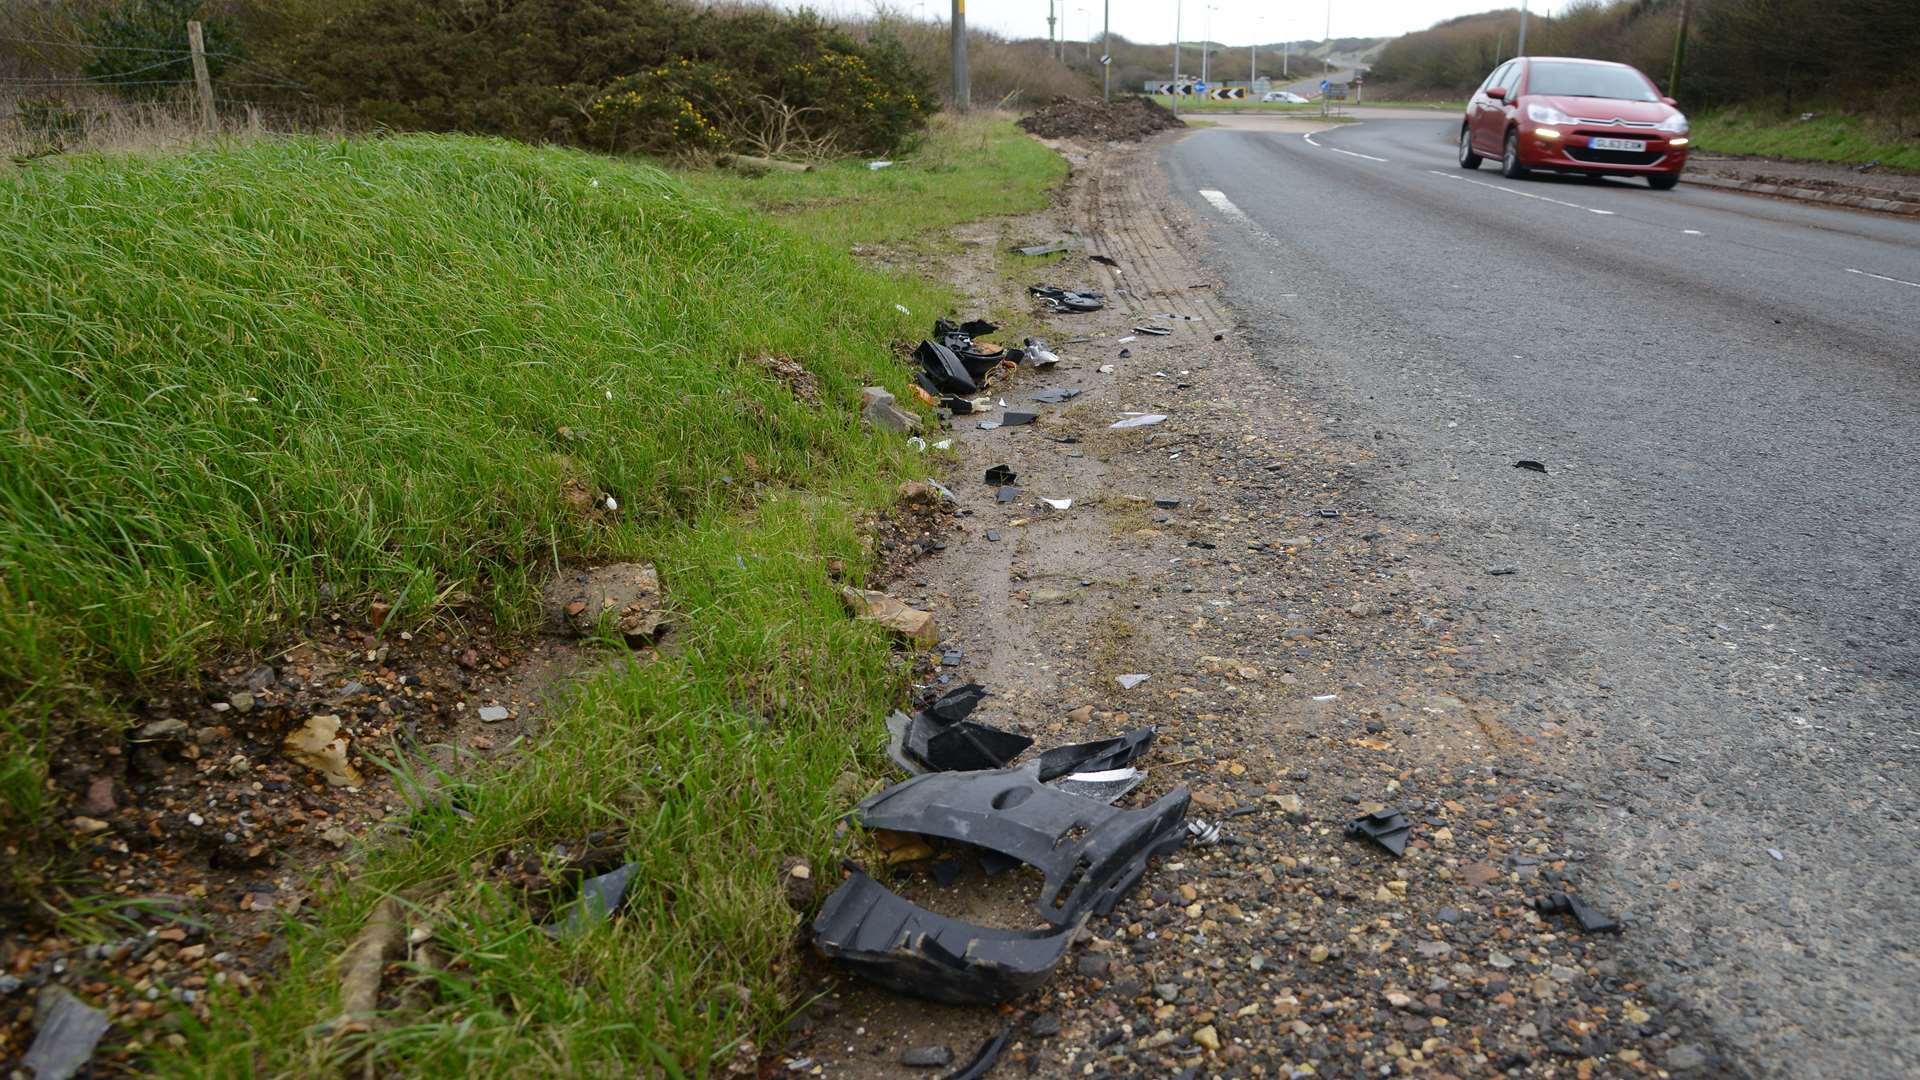 Last traces of the minibus and car crash at Capel-le-Ferne as seen next day.